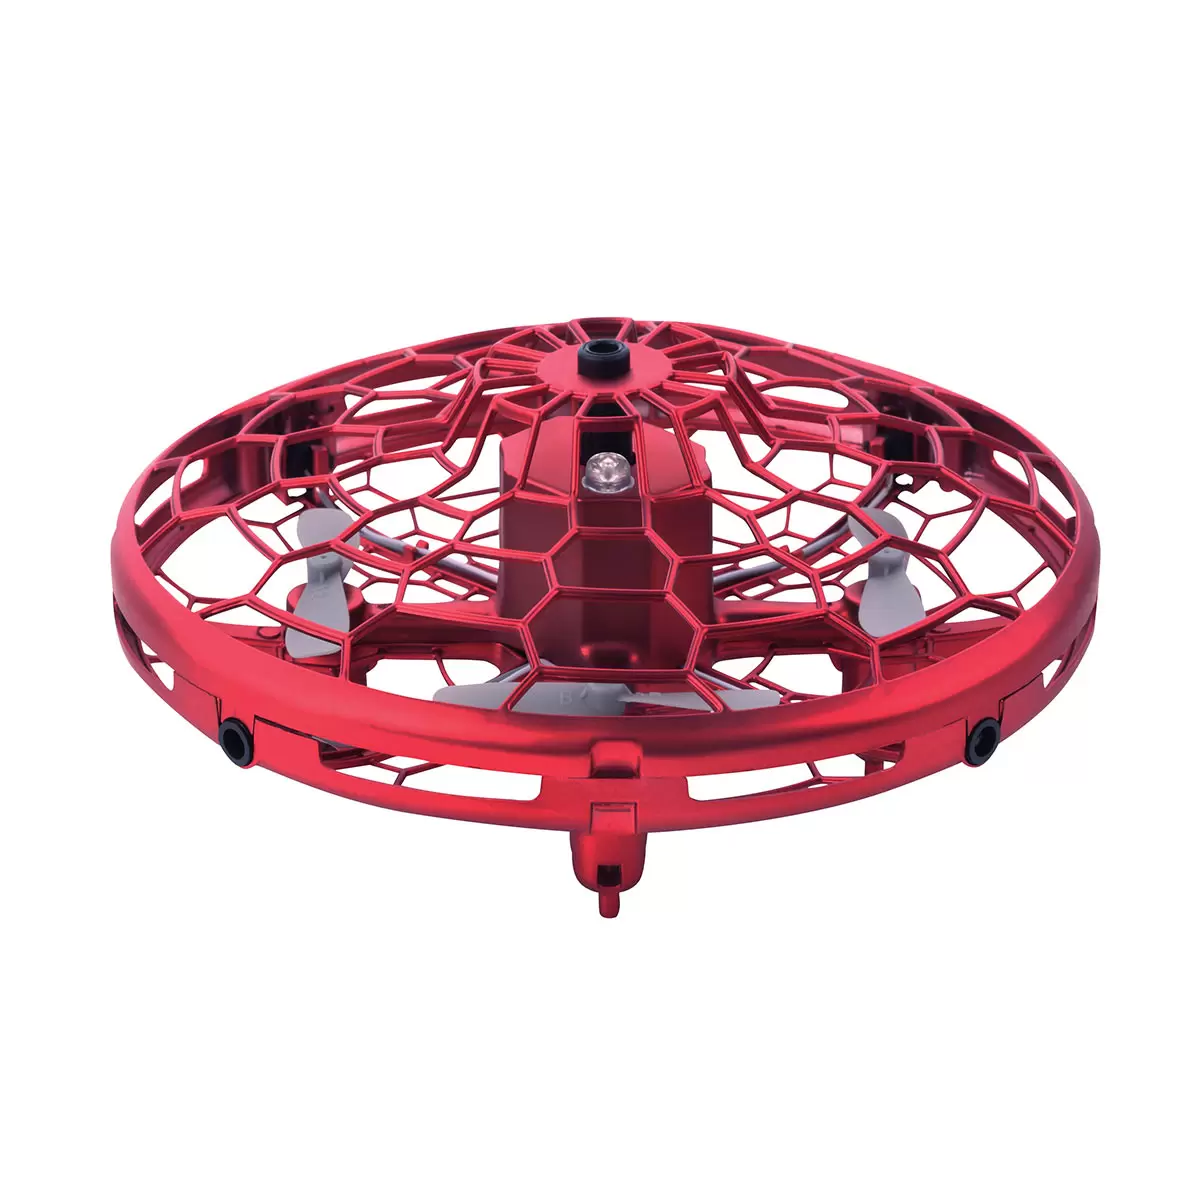 Buy Hover Star UFO in Red Item Image at Costco.co.uk